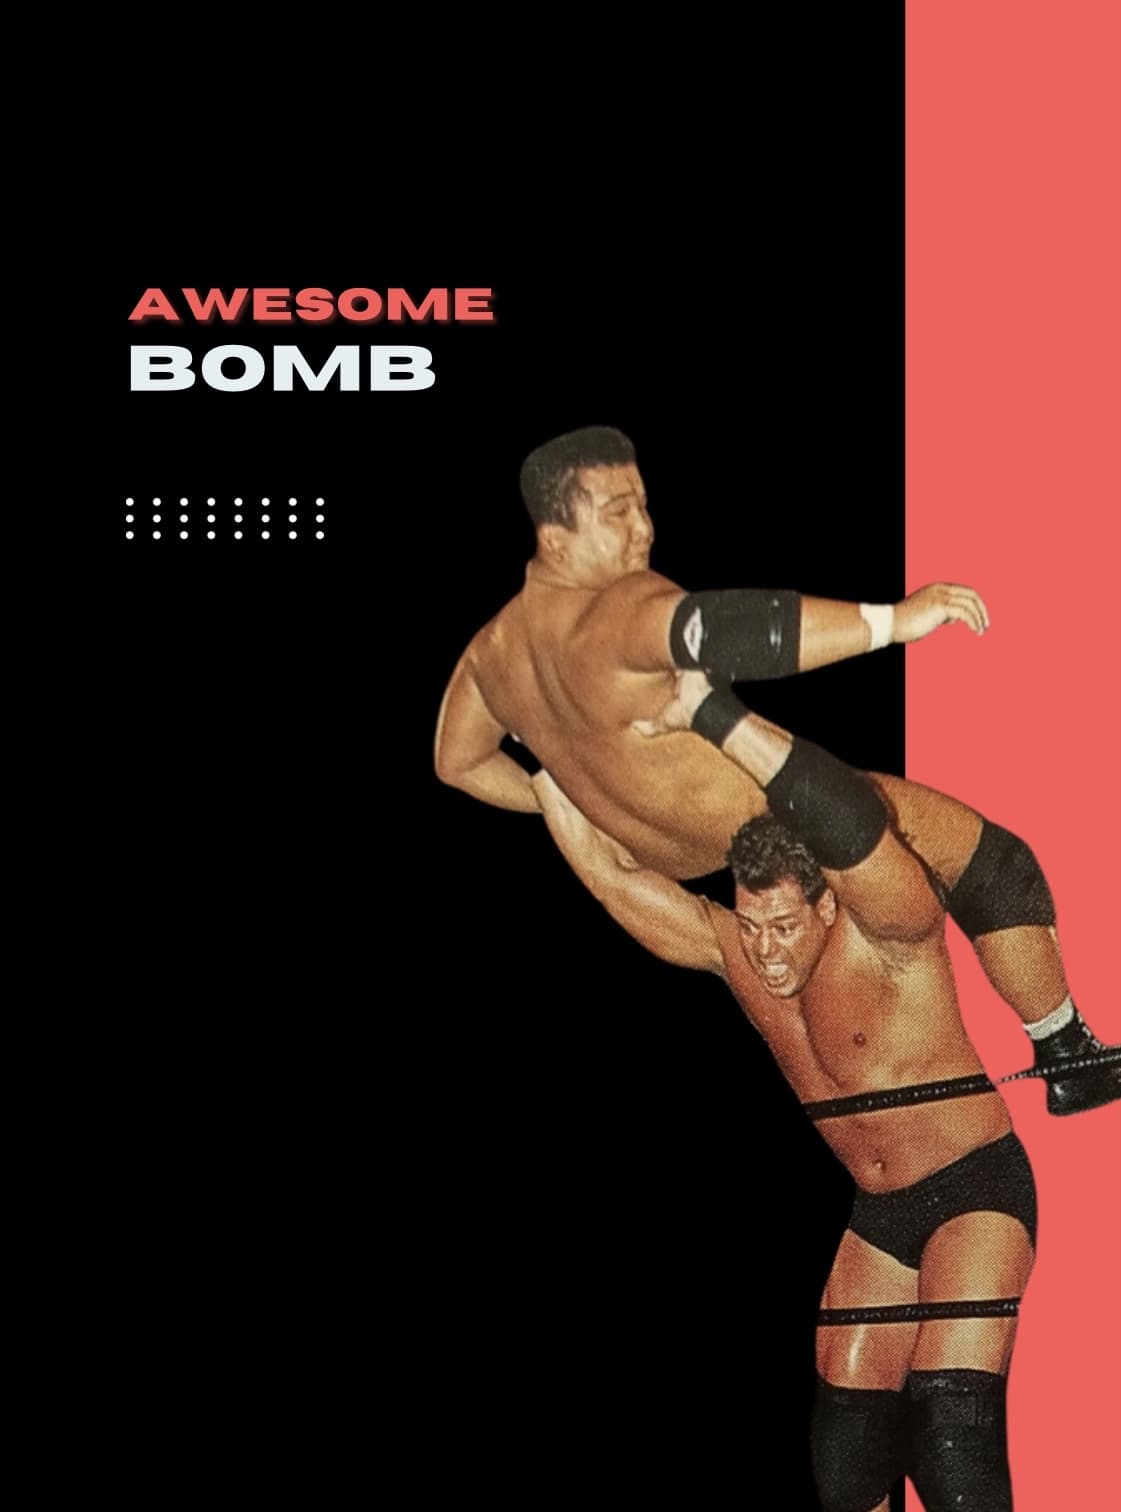 AWESOME BOMB